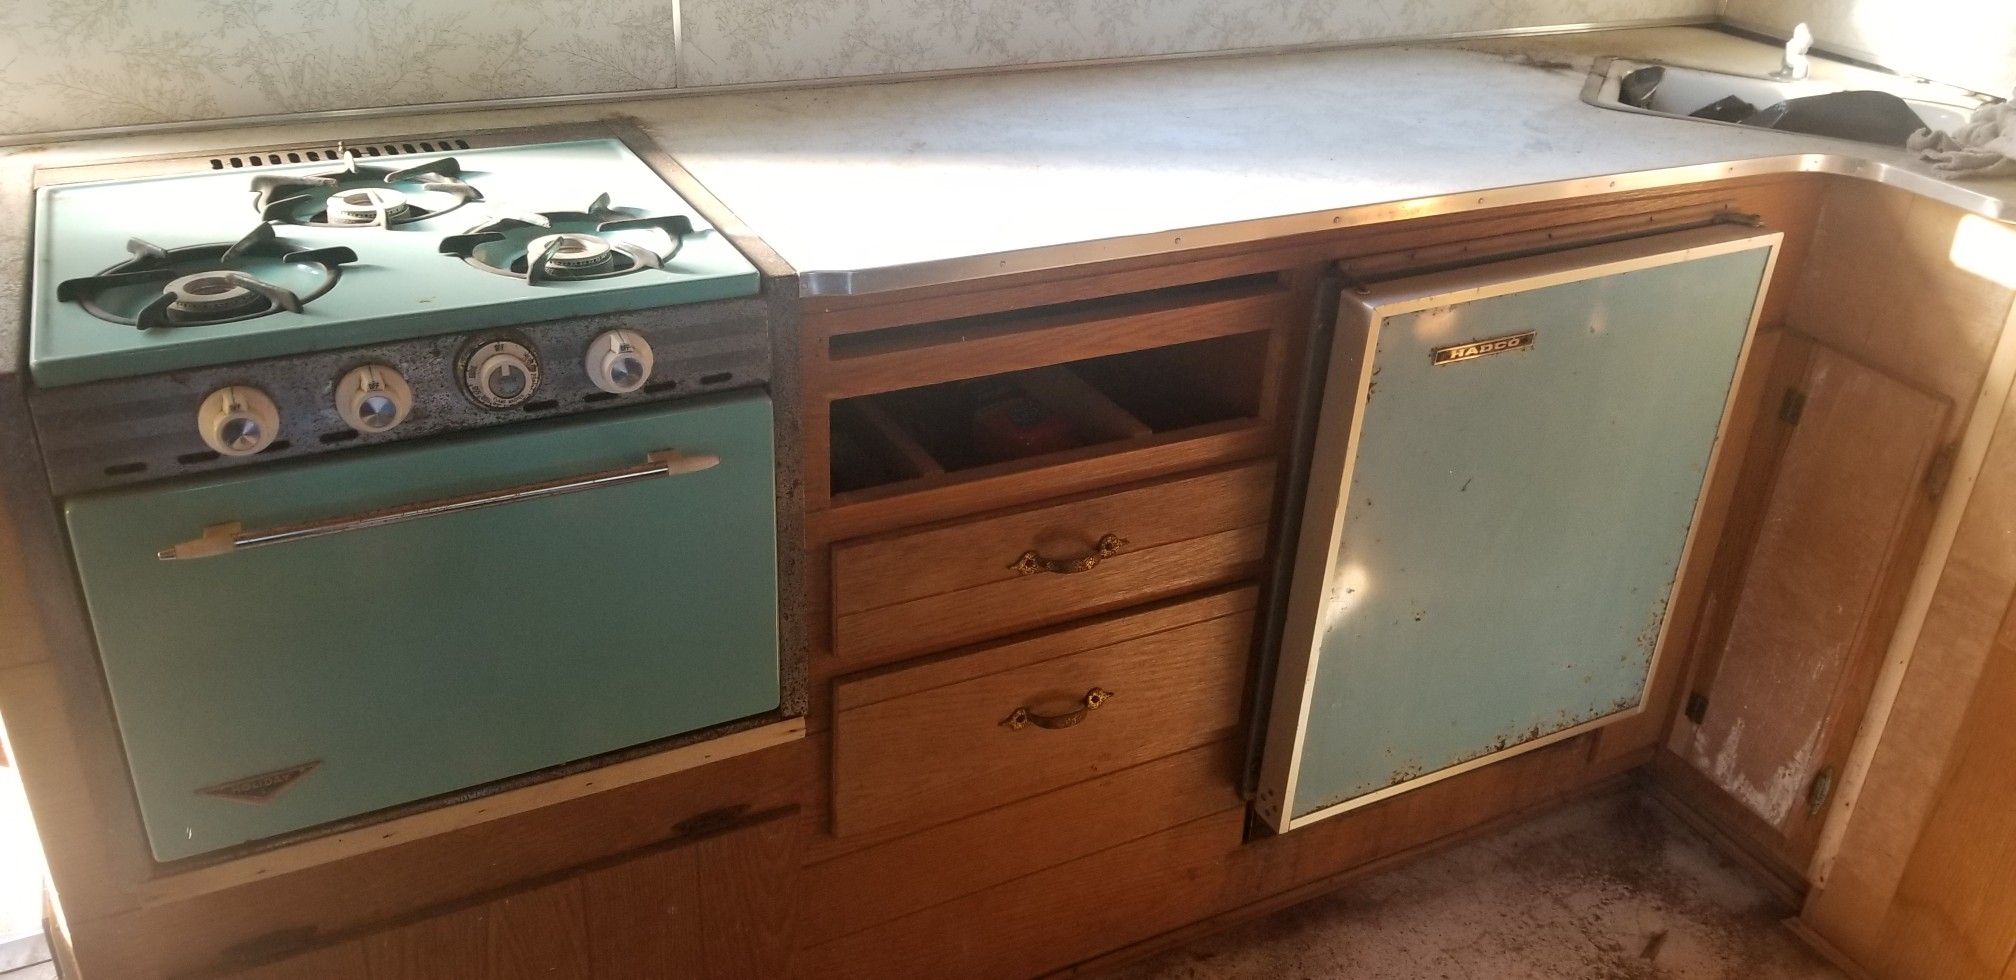 1965 Camper Fridge and Stove with matching Hood Vent